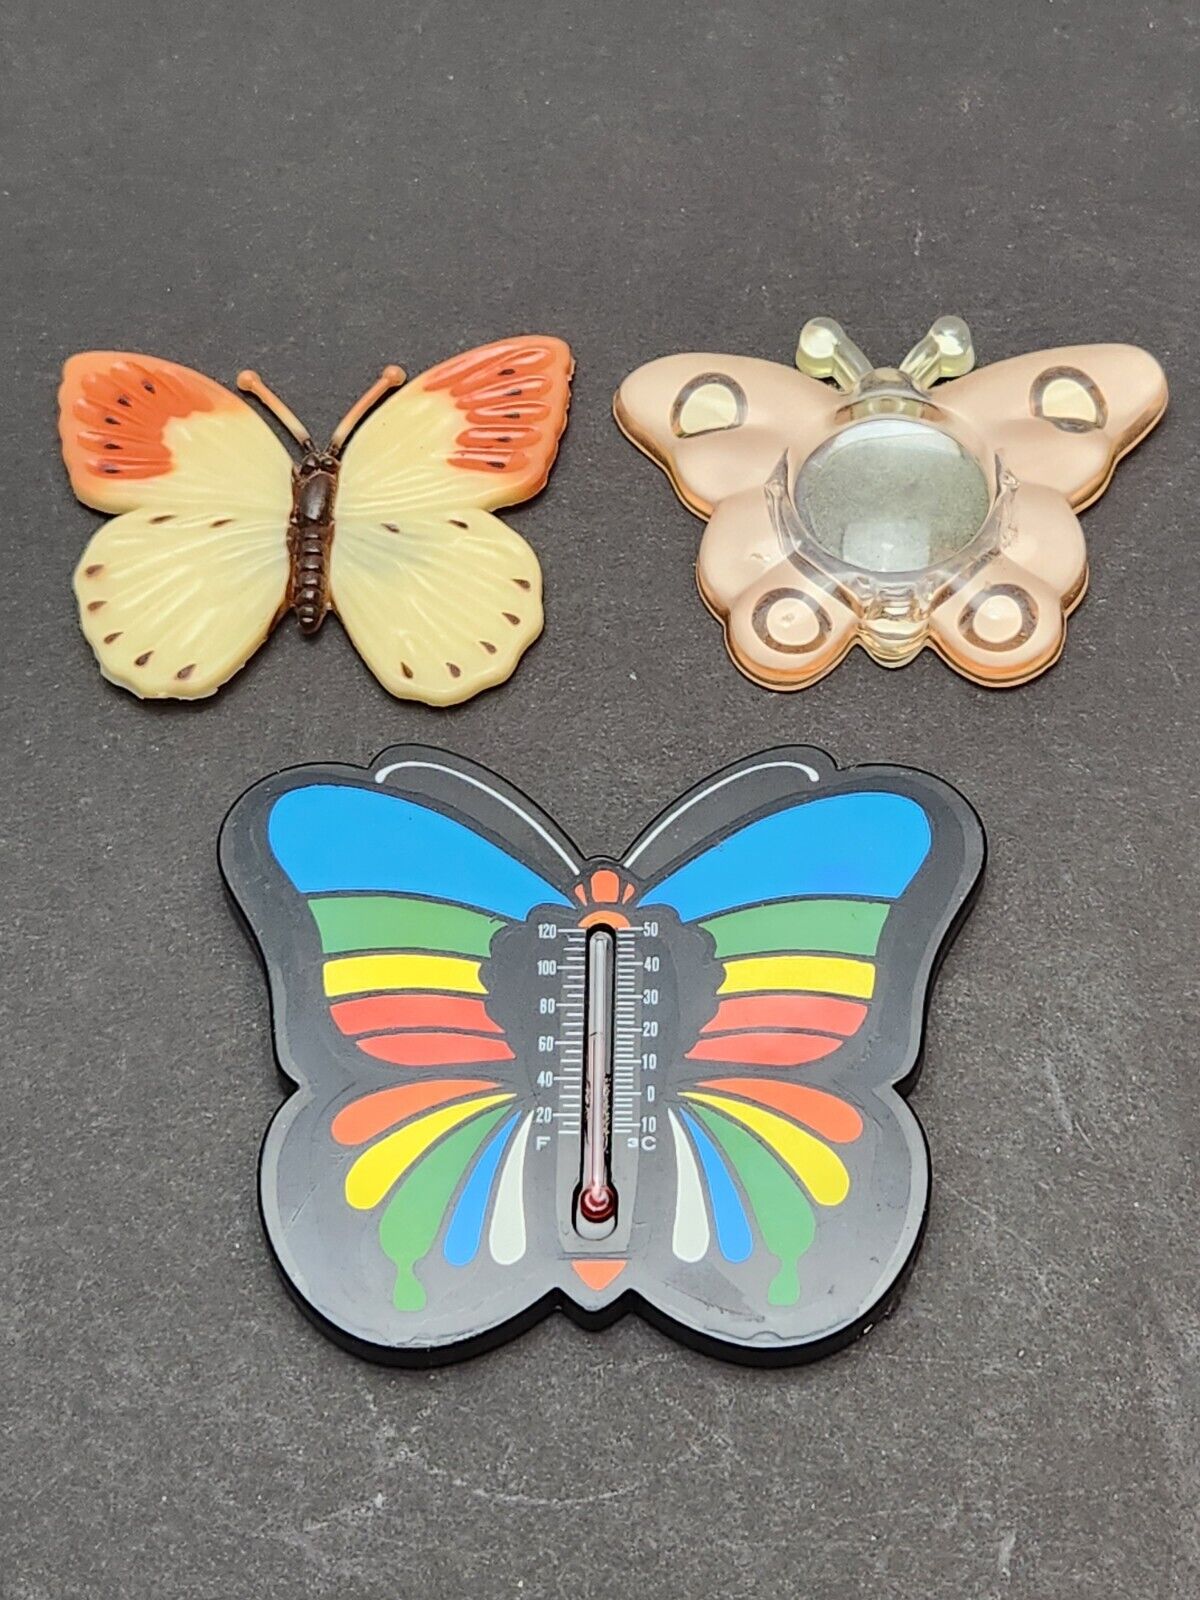 3 Vintage Butterfly Refrigerator Magnets, Picture, Rubber & Plastic Thermometer